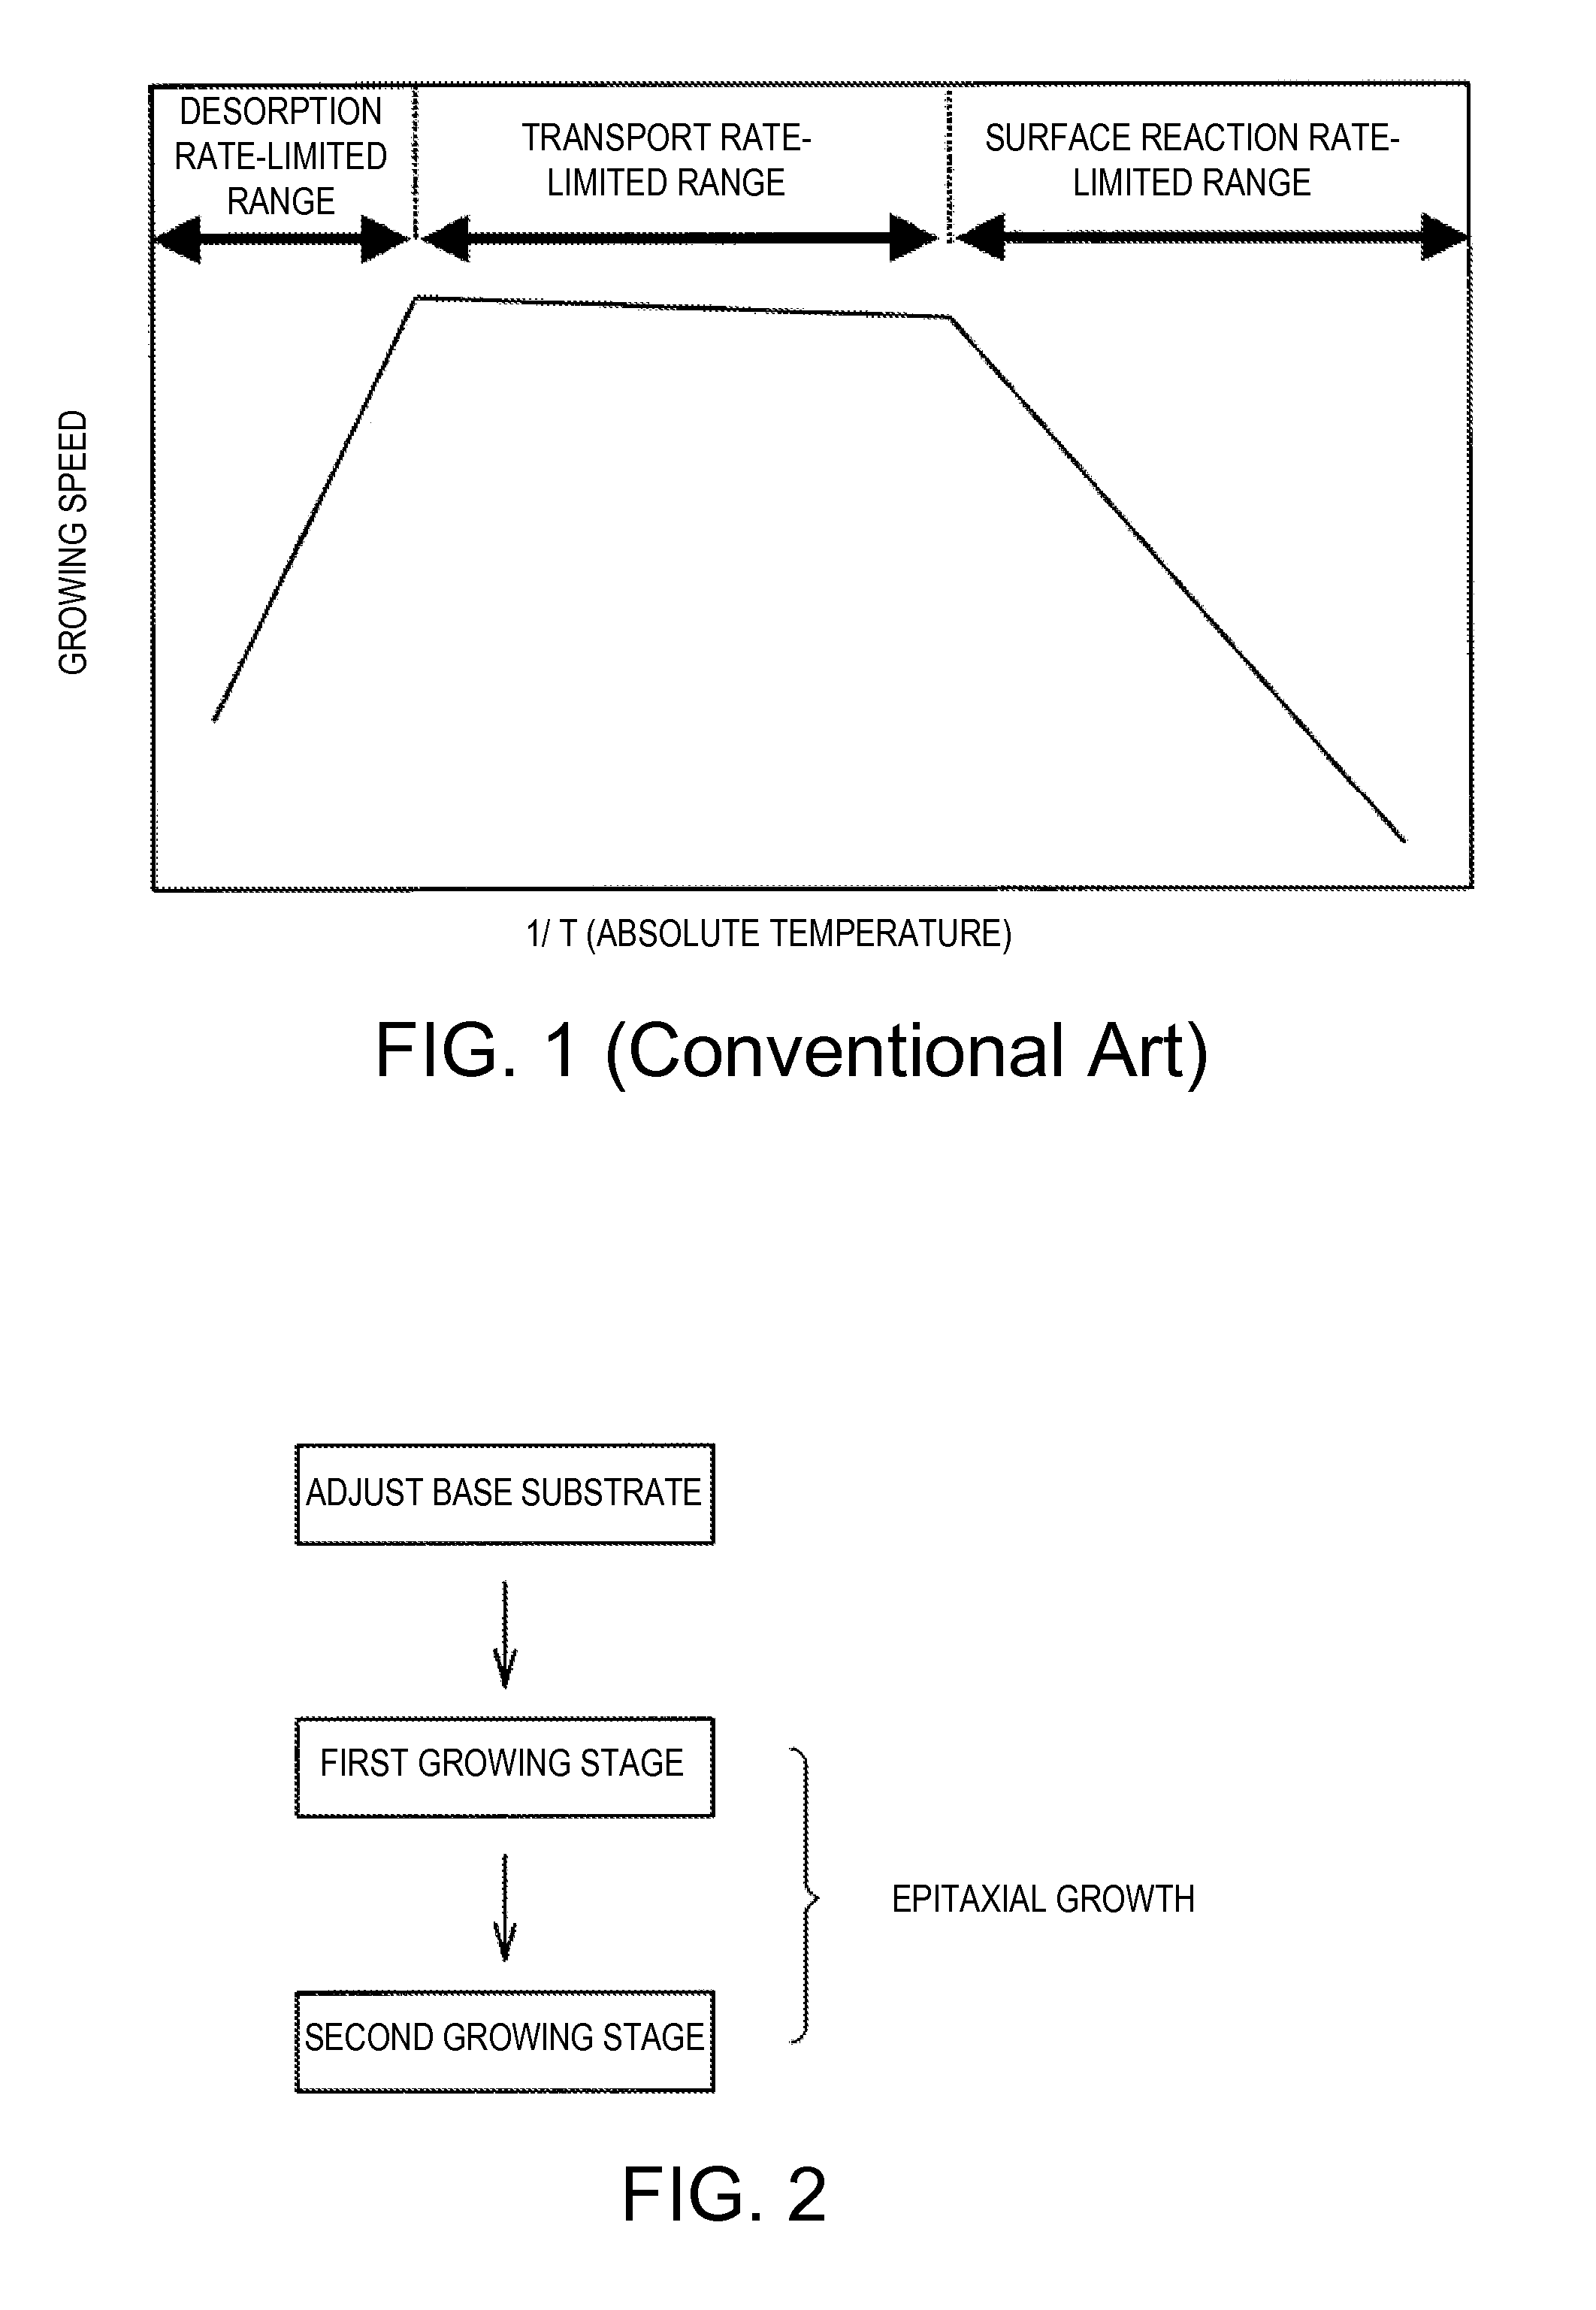 Method of manufacturing single crystal 3c-sic substrate and single crystal 3c-sic substrate obtained from the manufacturing method